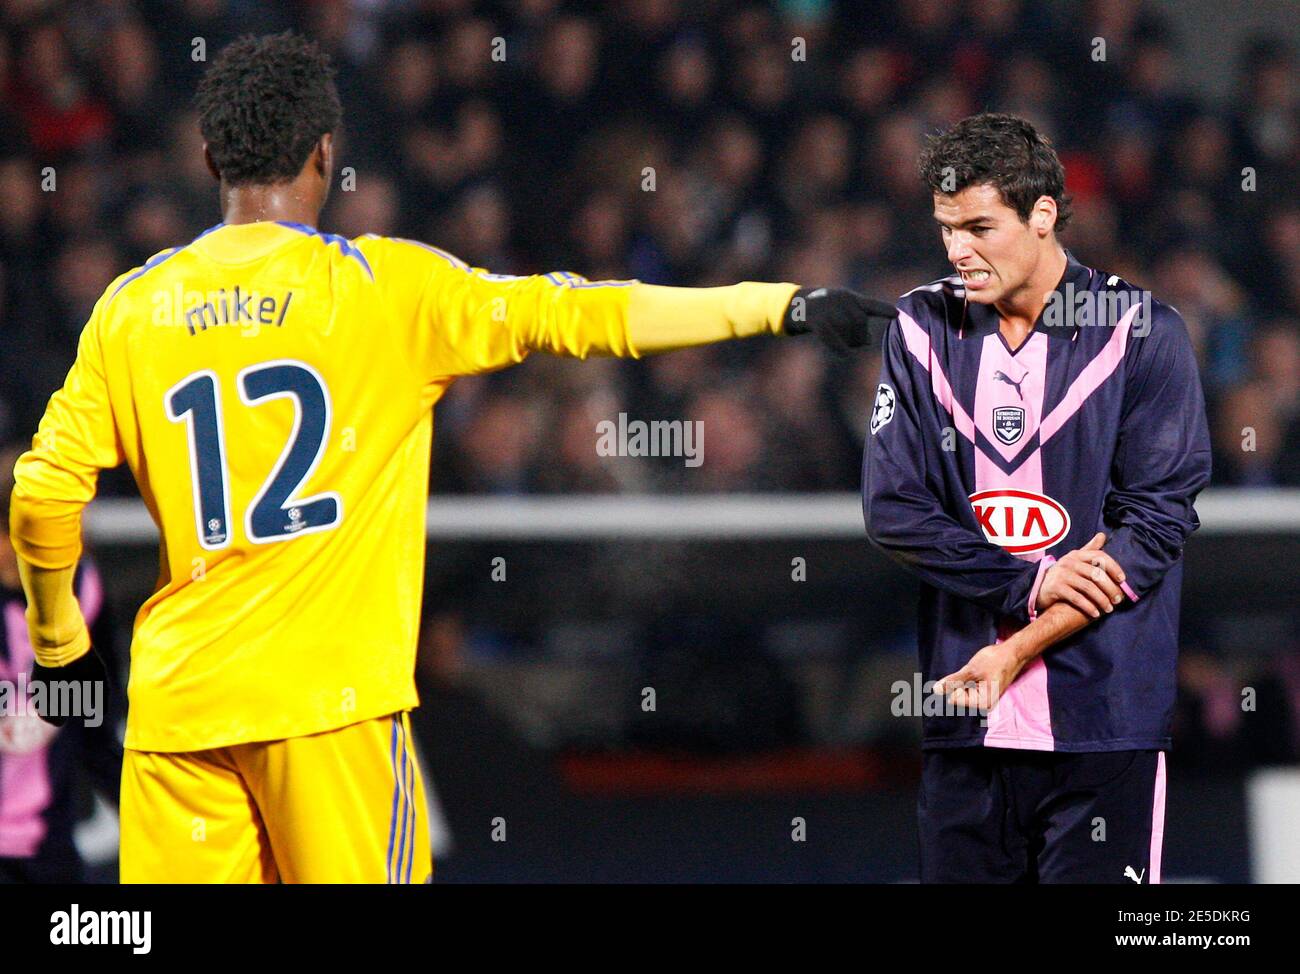 Chelsea's John Mikel Obi and Bordeaux's Yoann Gourcuff during the Champions League soccer match, Girondins de Bordeaux vs Chelsea at the Chaban Delmas stadium in Bordeaux, France on November 26, 2008. The match ended in a 1-1 draw. Photo by Patrick Bernard/Cameleon/ABACAPRESS.COM Stock Photo